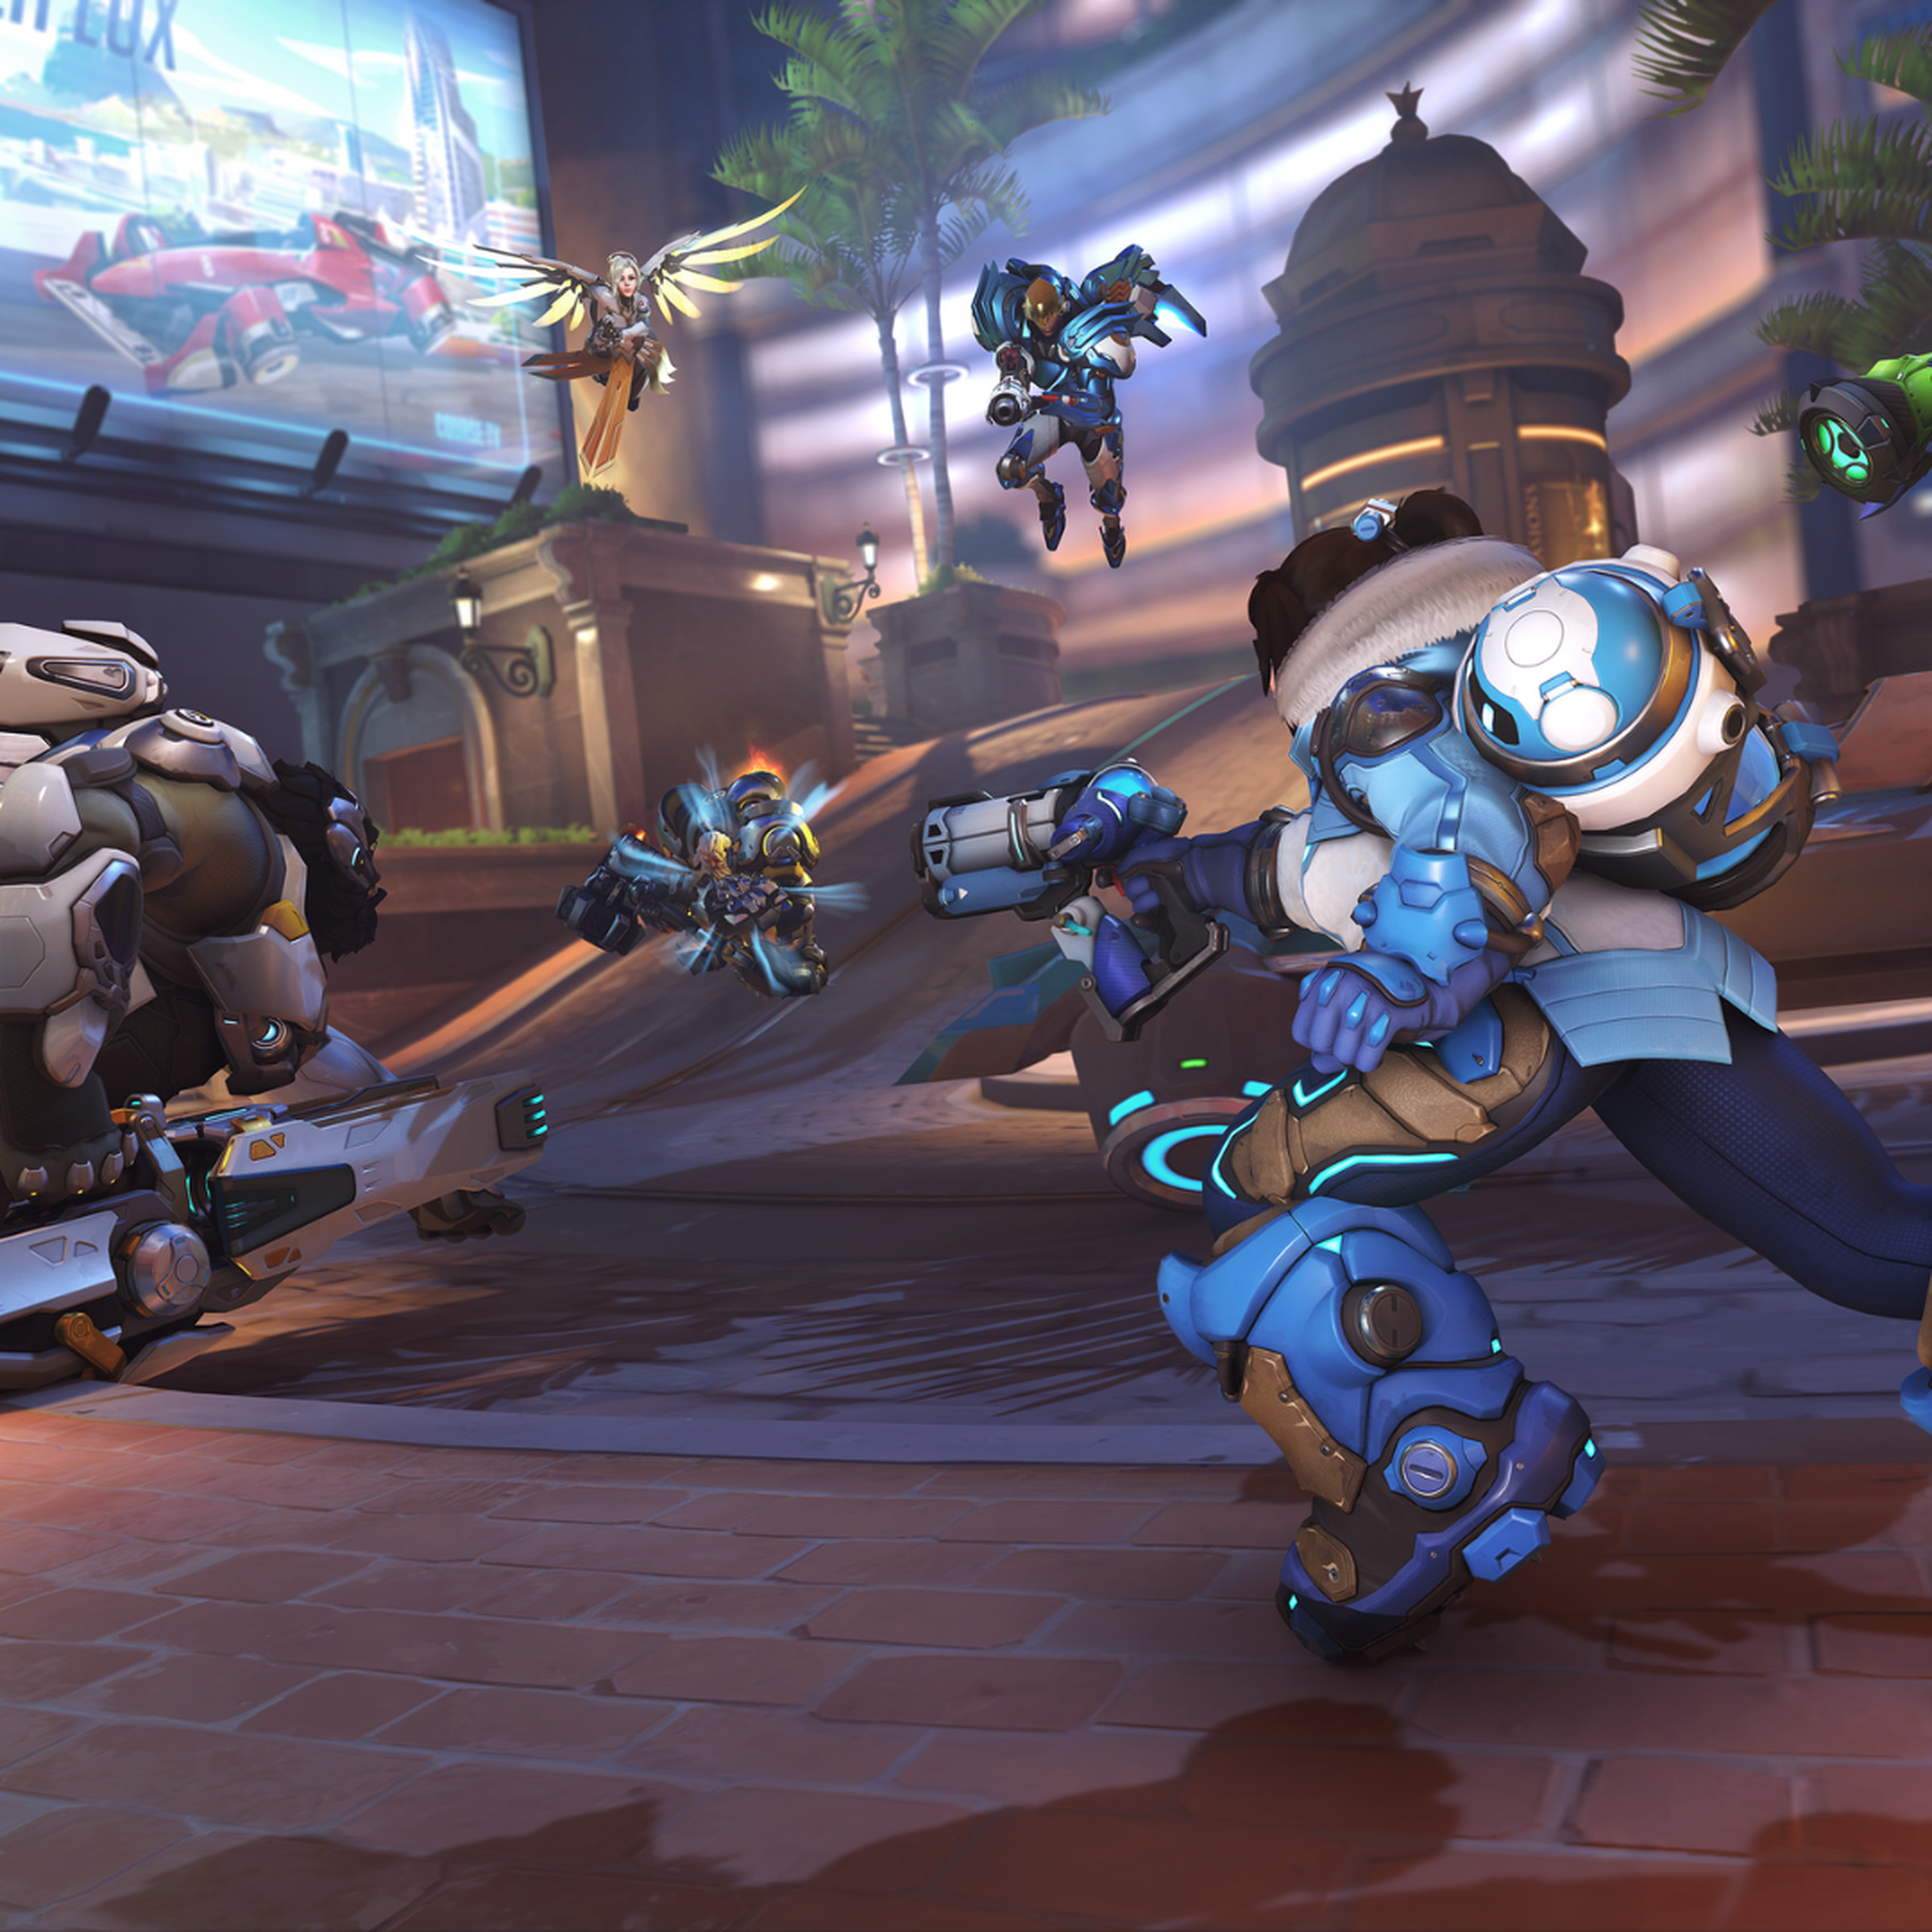 Screenshot from Overwatch 2 featuring two teams comprised of heroes Mei, Winston, Pharah, Mercy, Reinhardt, and Lucio fighting over the payload on the Circuit Royal map.